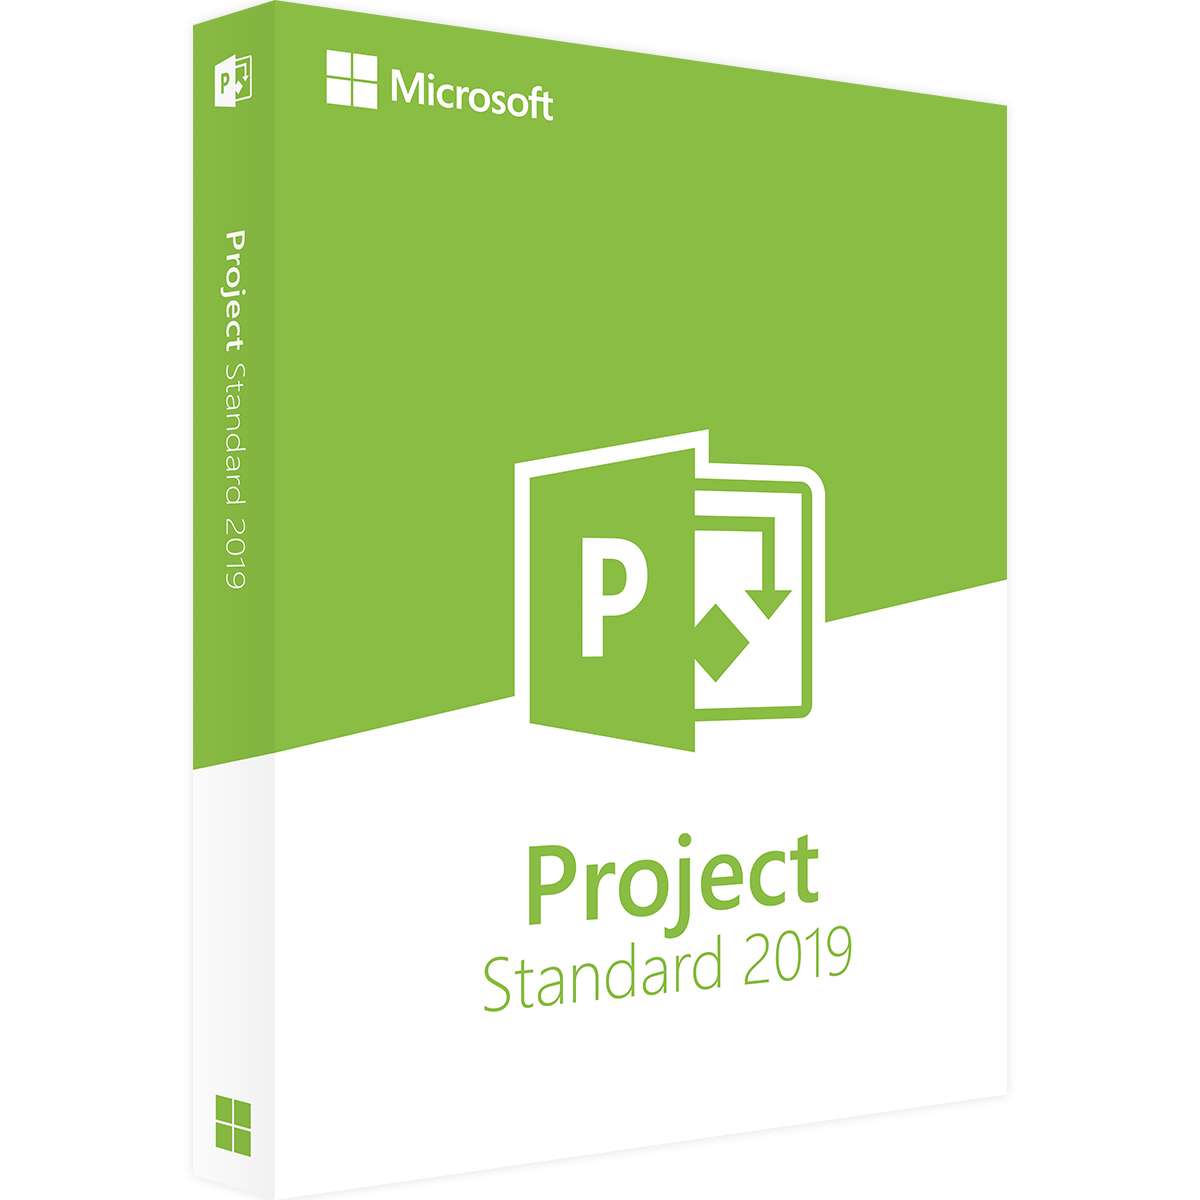 MS Project 2019 is currently the latest version and can be used on a Mac.